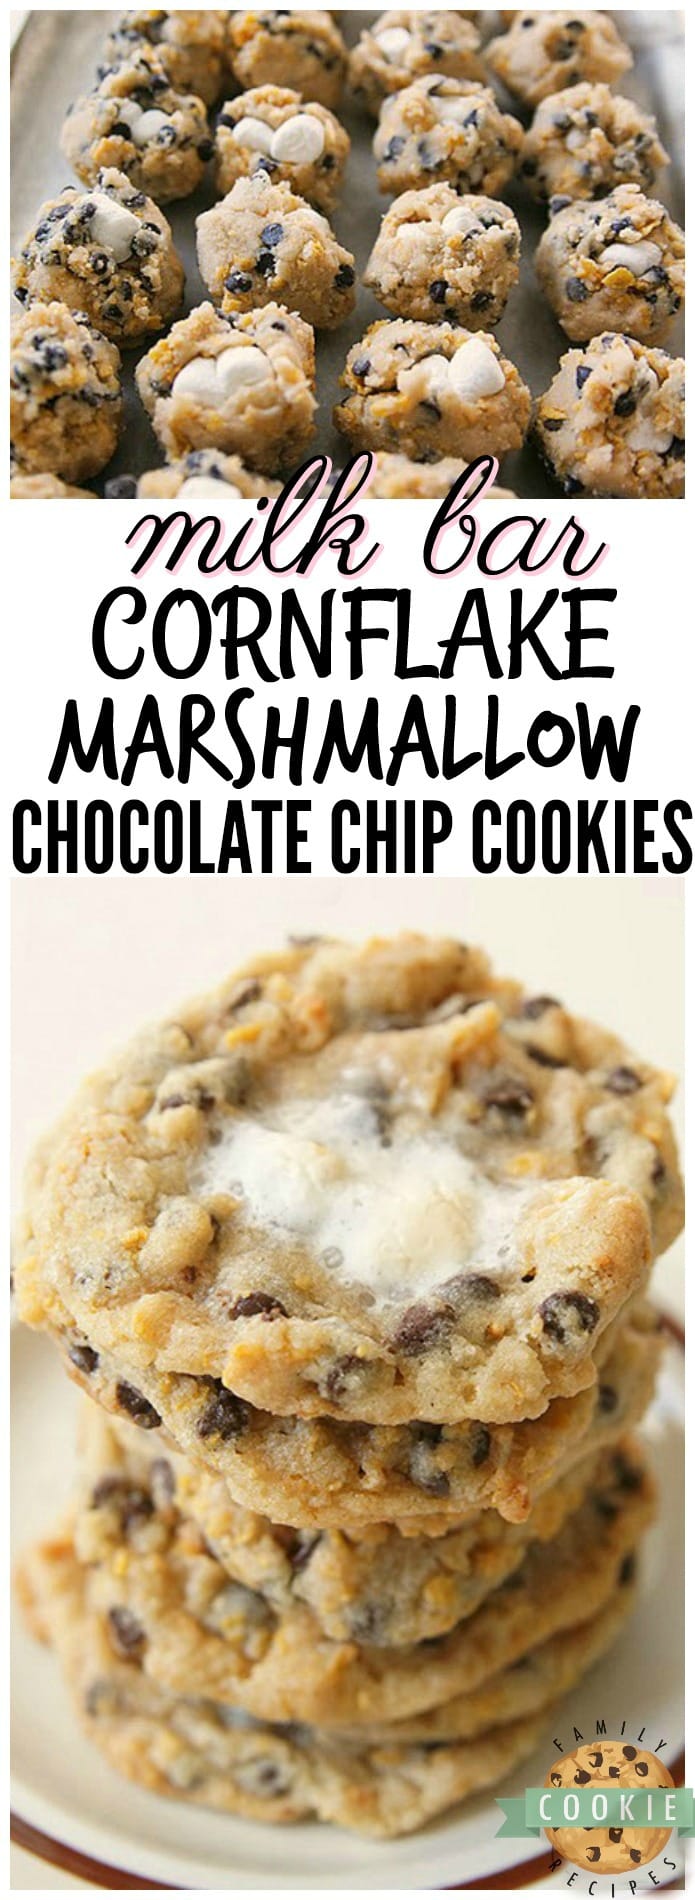 Milk Bar Cornflake Marshmallow Cookies just like the ones served in Momofuku Milk Bar in NYC! I think my version is even BETTER...and they're easier to make! See my tips and tricks on making these incredible cornflake chocolate chip cookies in your own kitchen. via @buttergirls